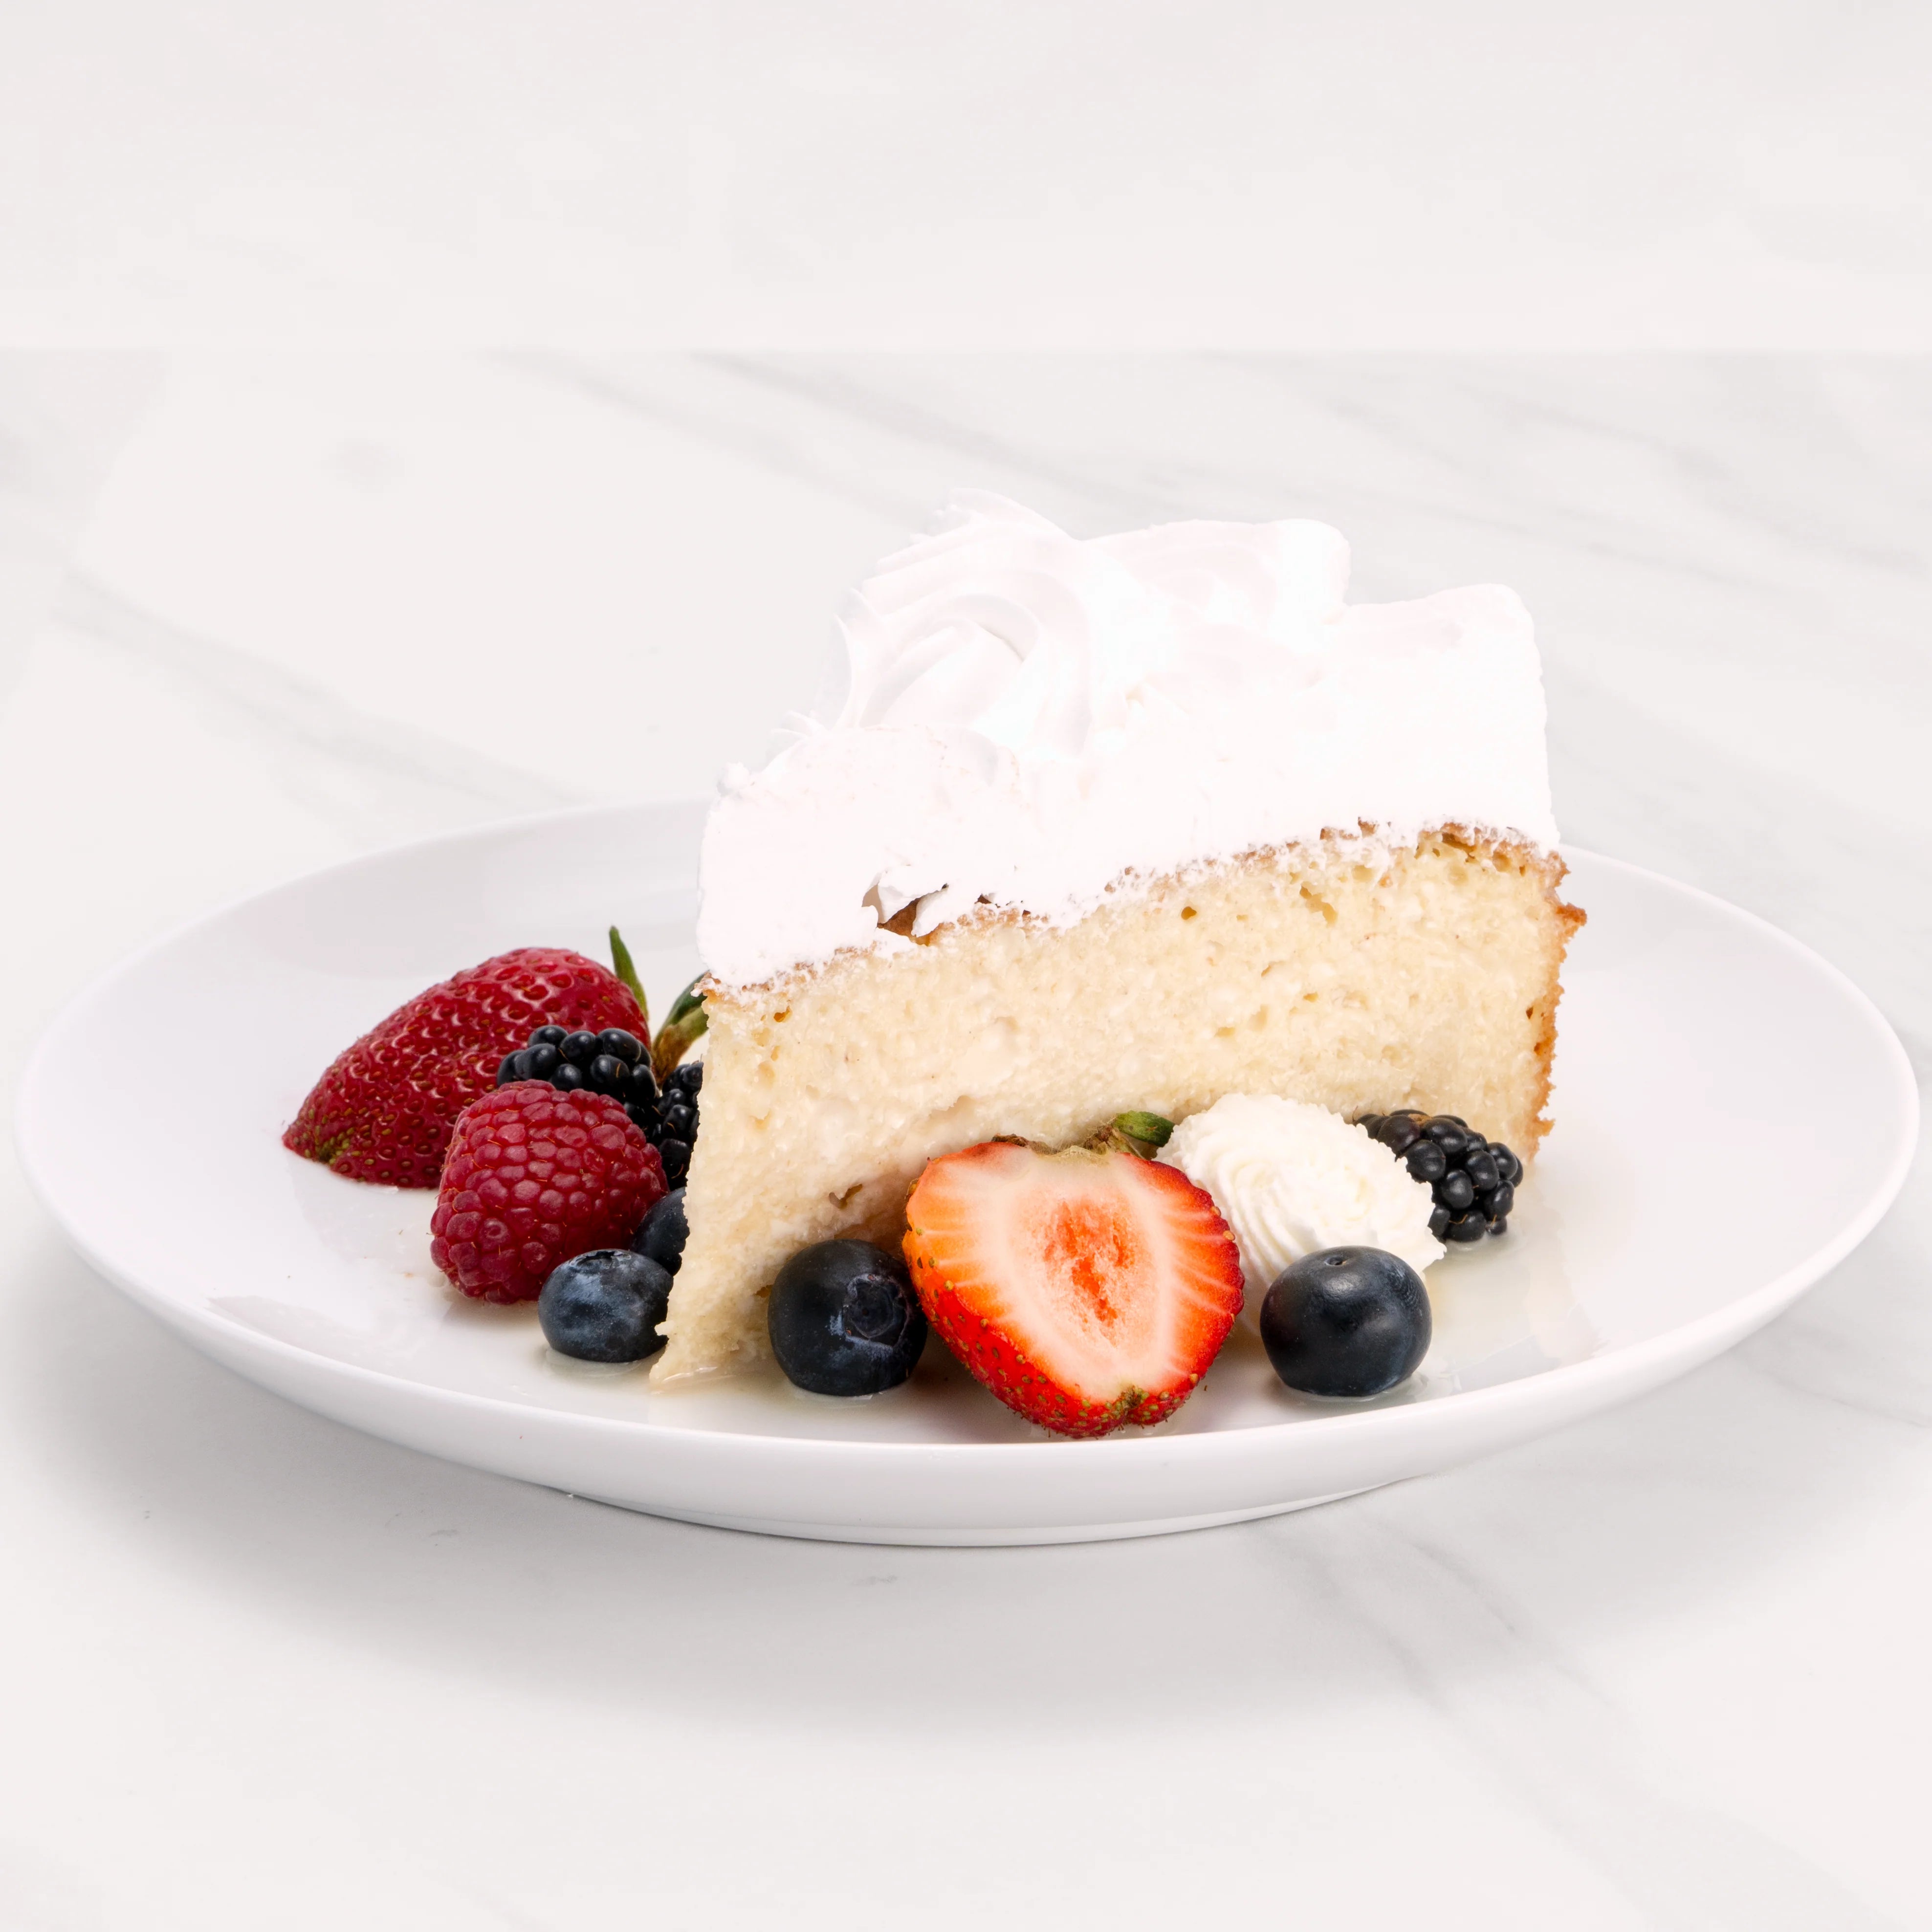 Slice of Tres Leches Cake garnished with blueberries, strawberries, blackberries, and crème.